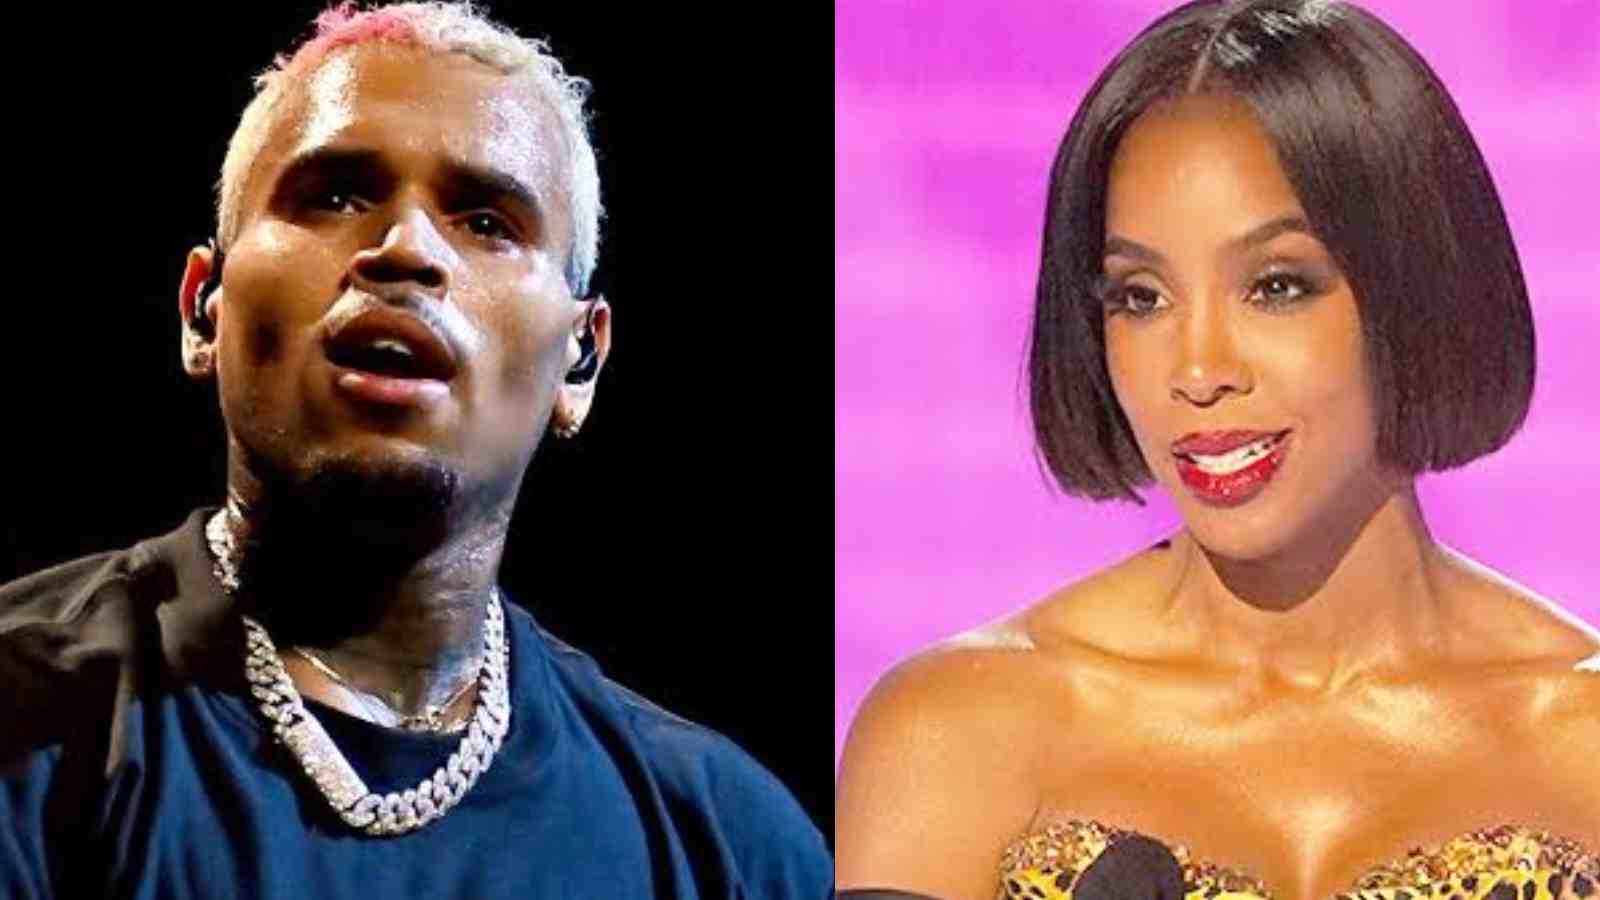 Kelly Rowland and Chris Brown